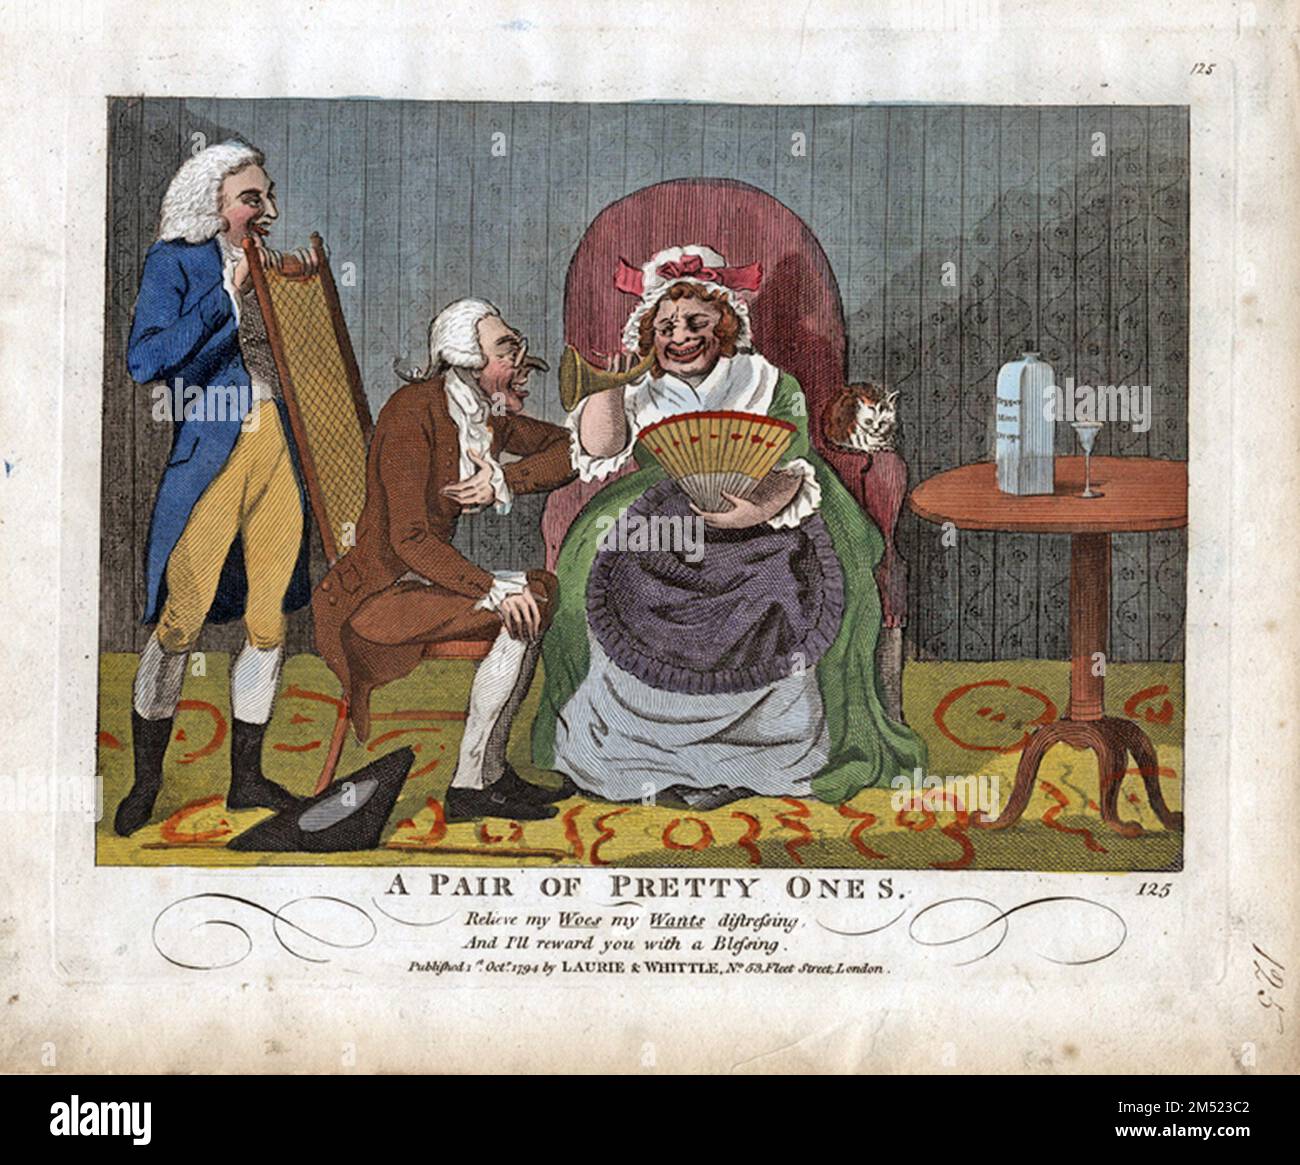 Etching of an old woman with two physicians, entitled A Pair of Pretty Ones, by an anonymous artist. Published 1794. The caption reads: Relieve my woes my wants distressing, and I'll reward you with a Blessing. Stock Photo